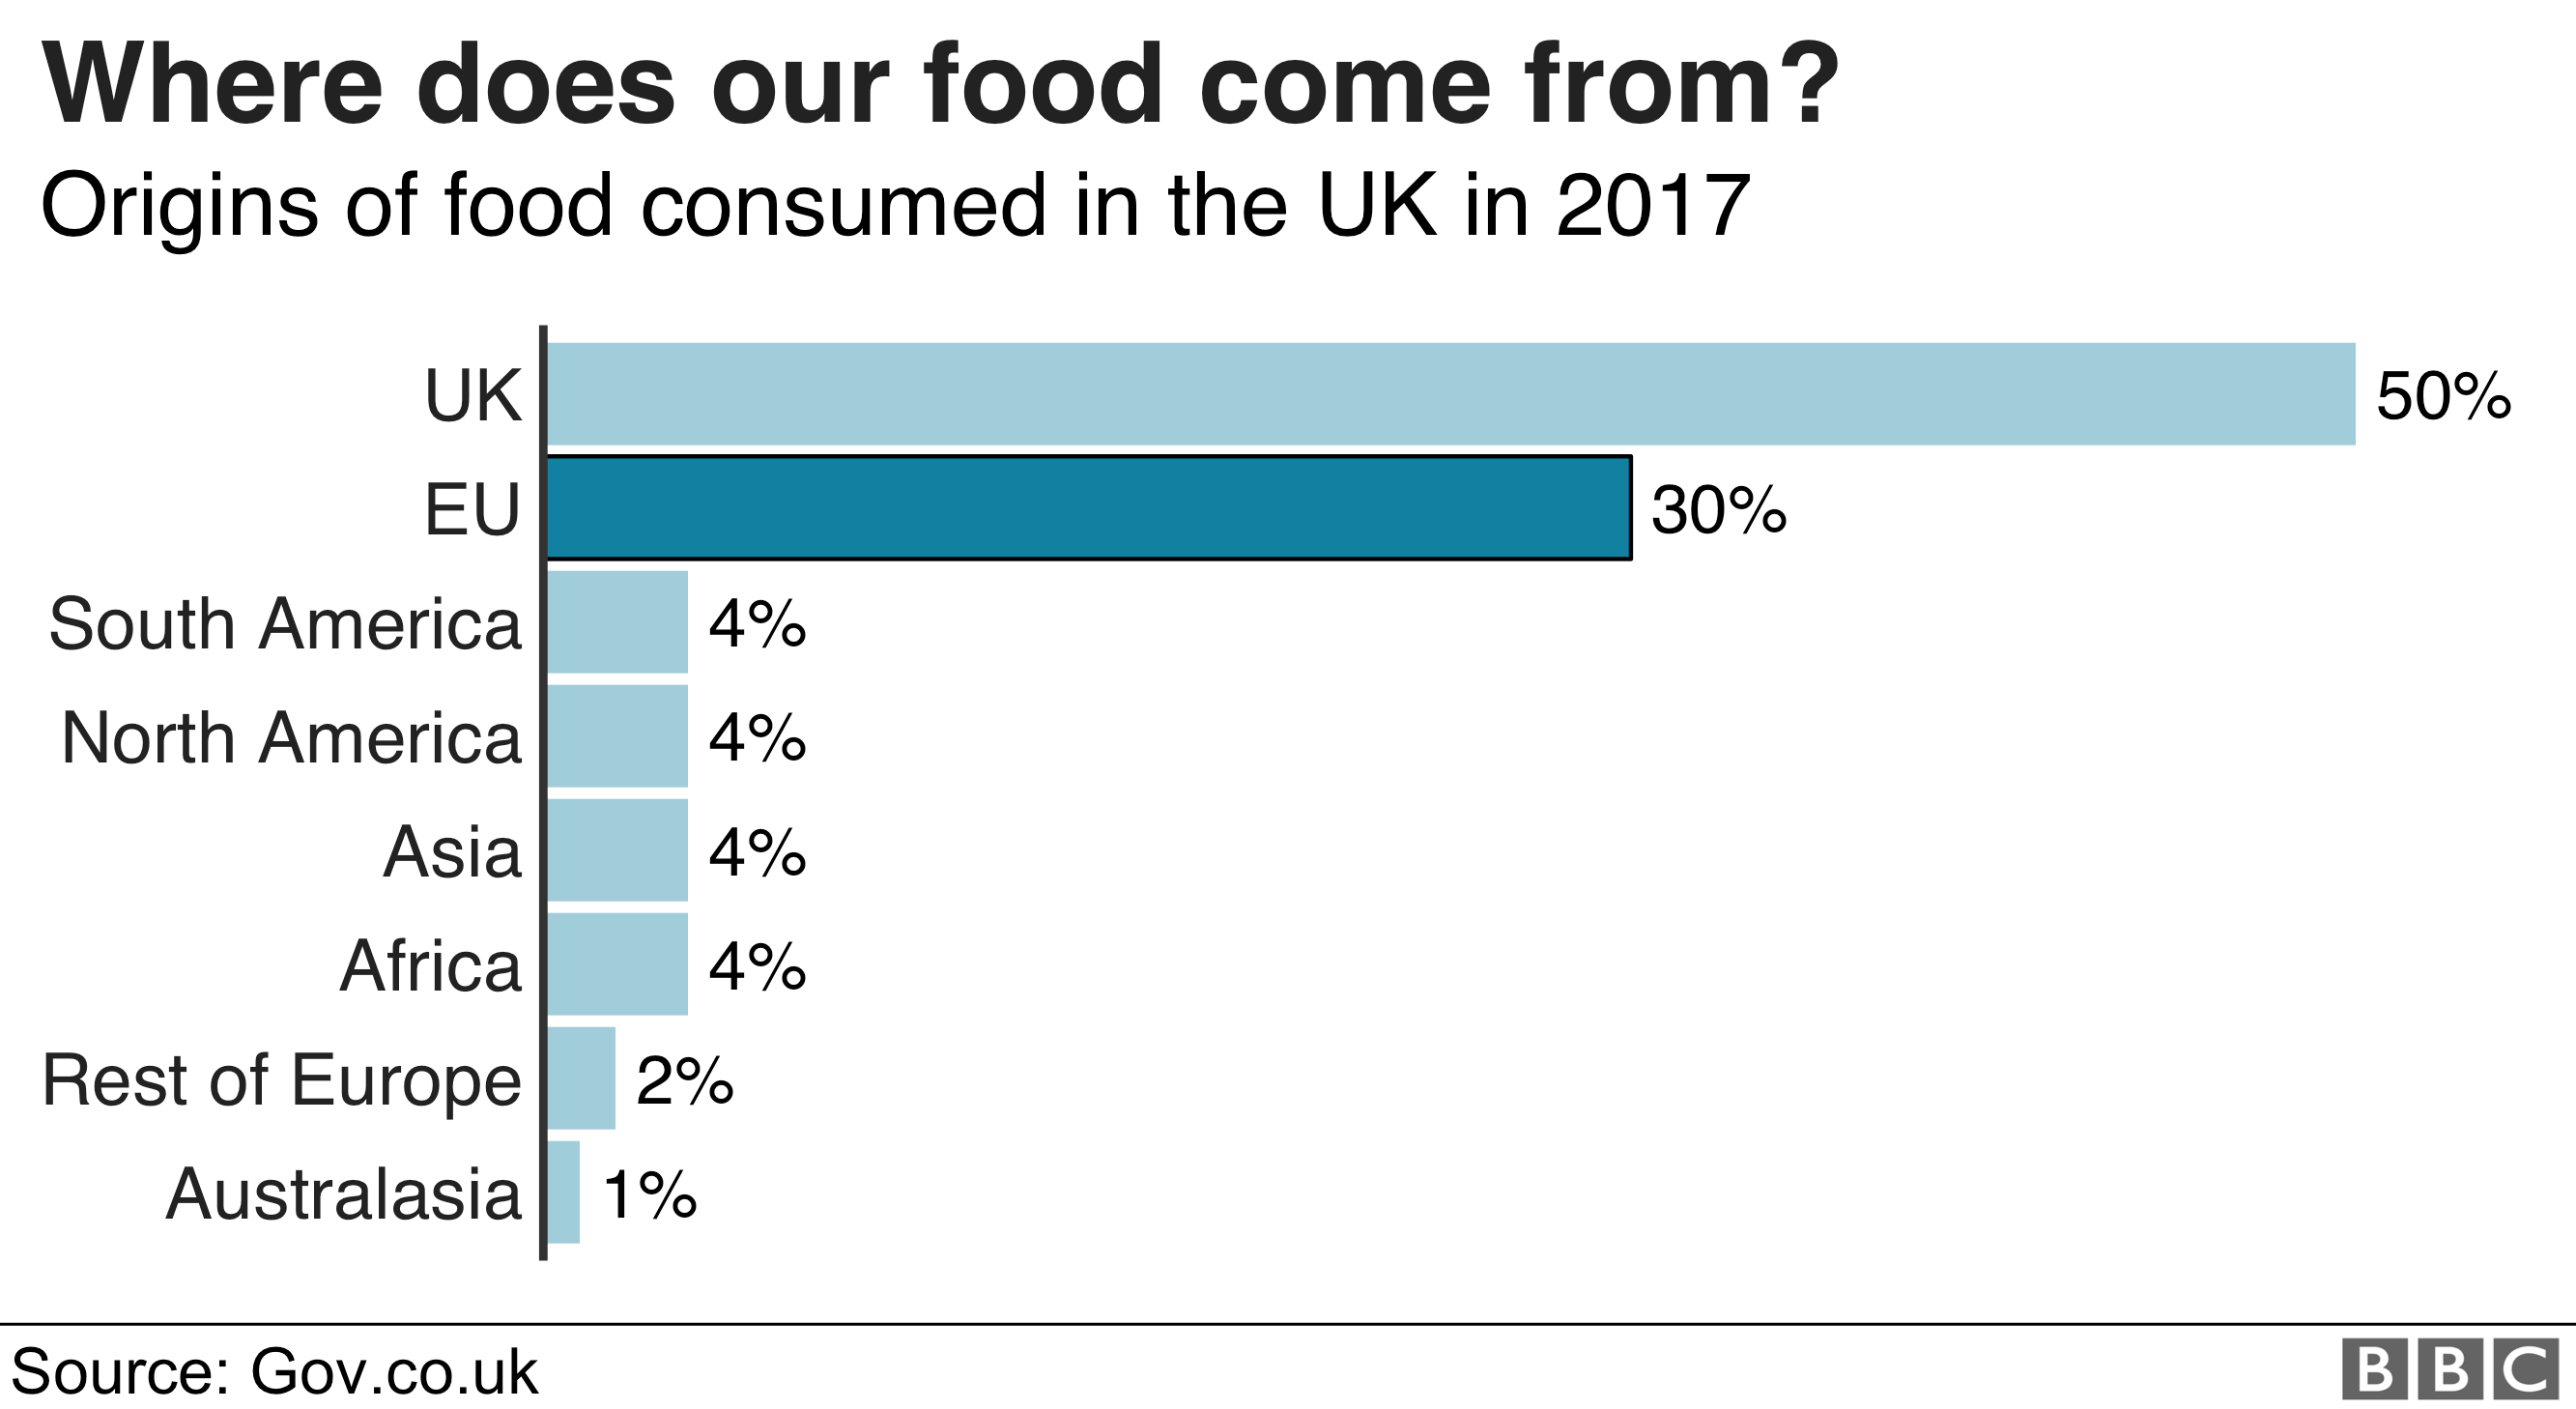 Chart showing where the UK's food comes from - 50% from the UK itself and 30% from the EU